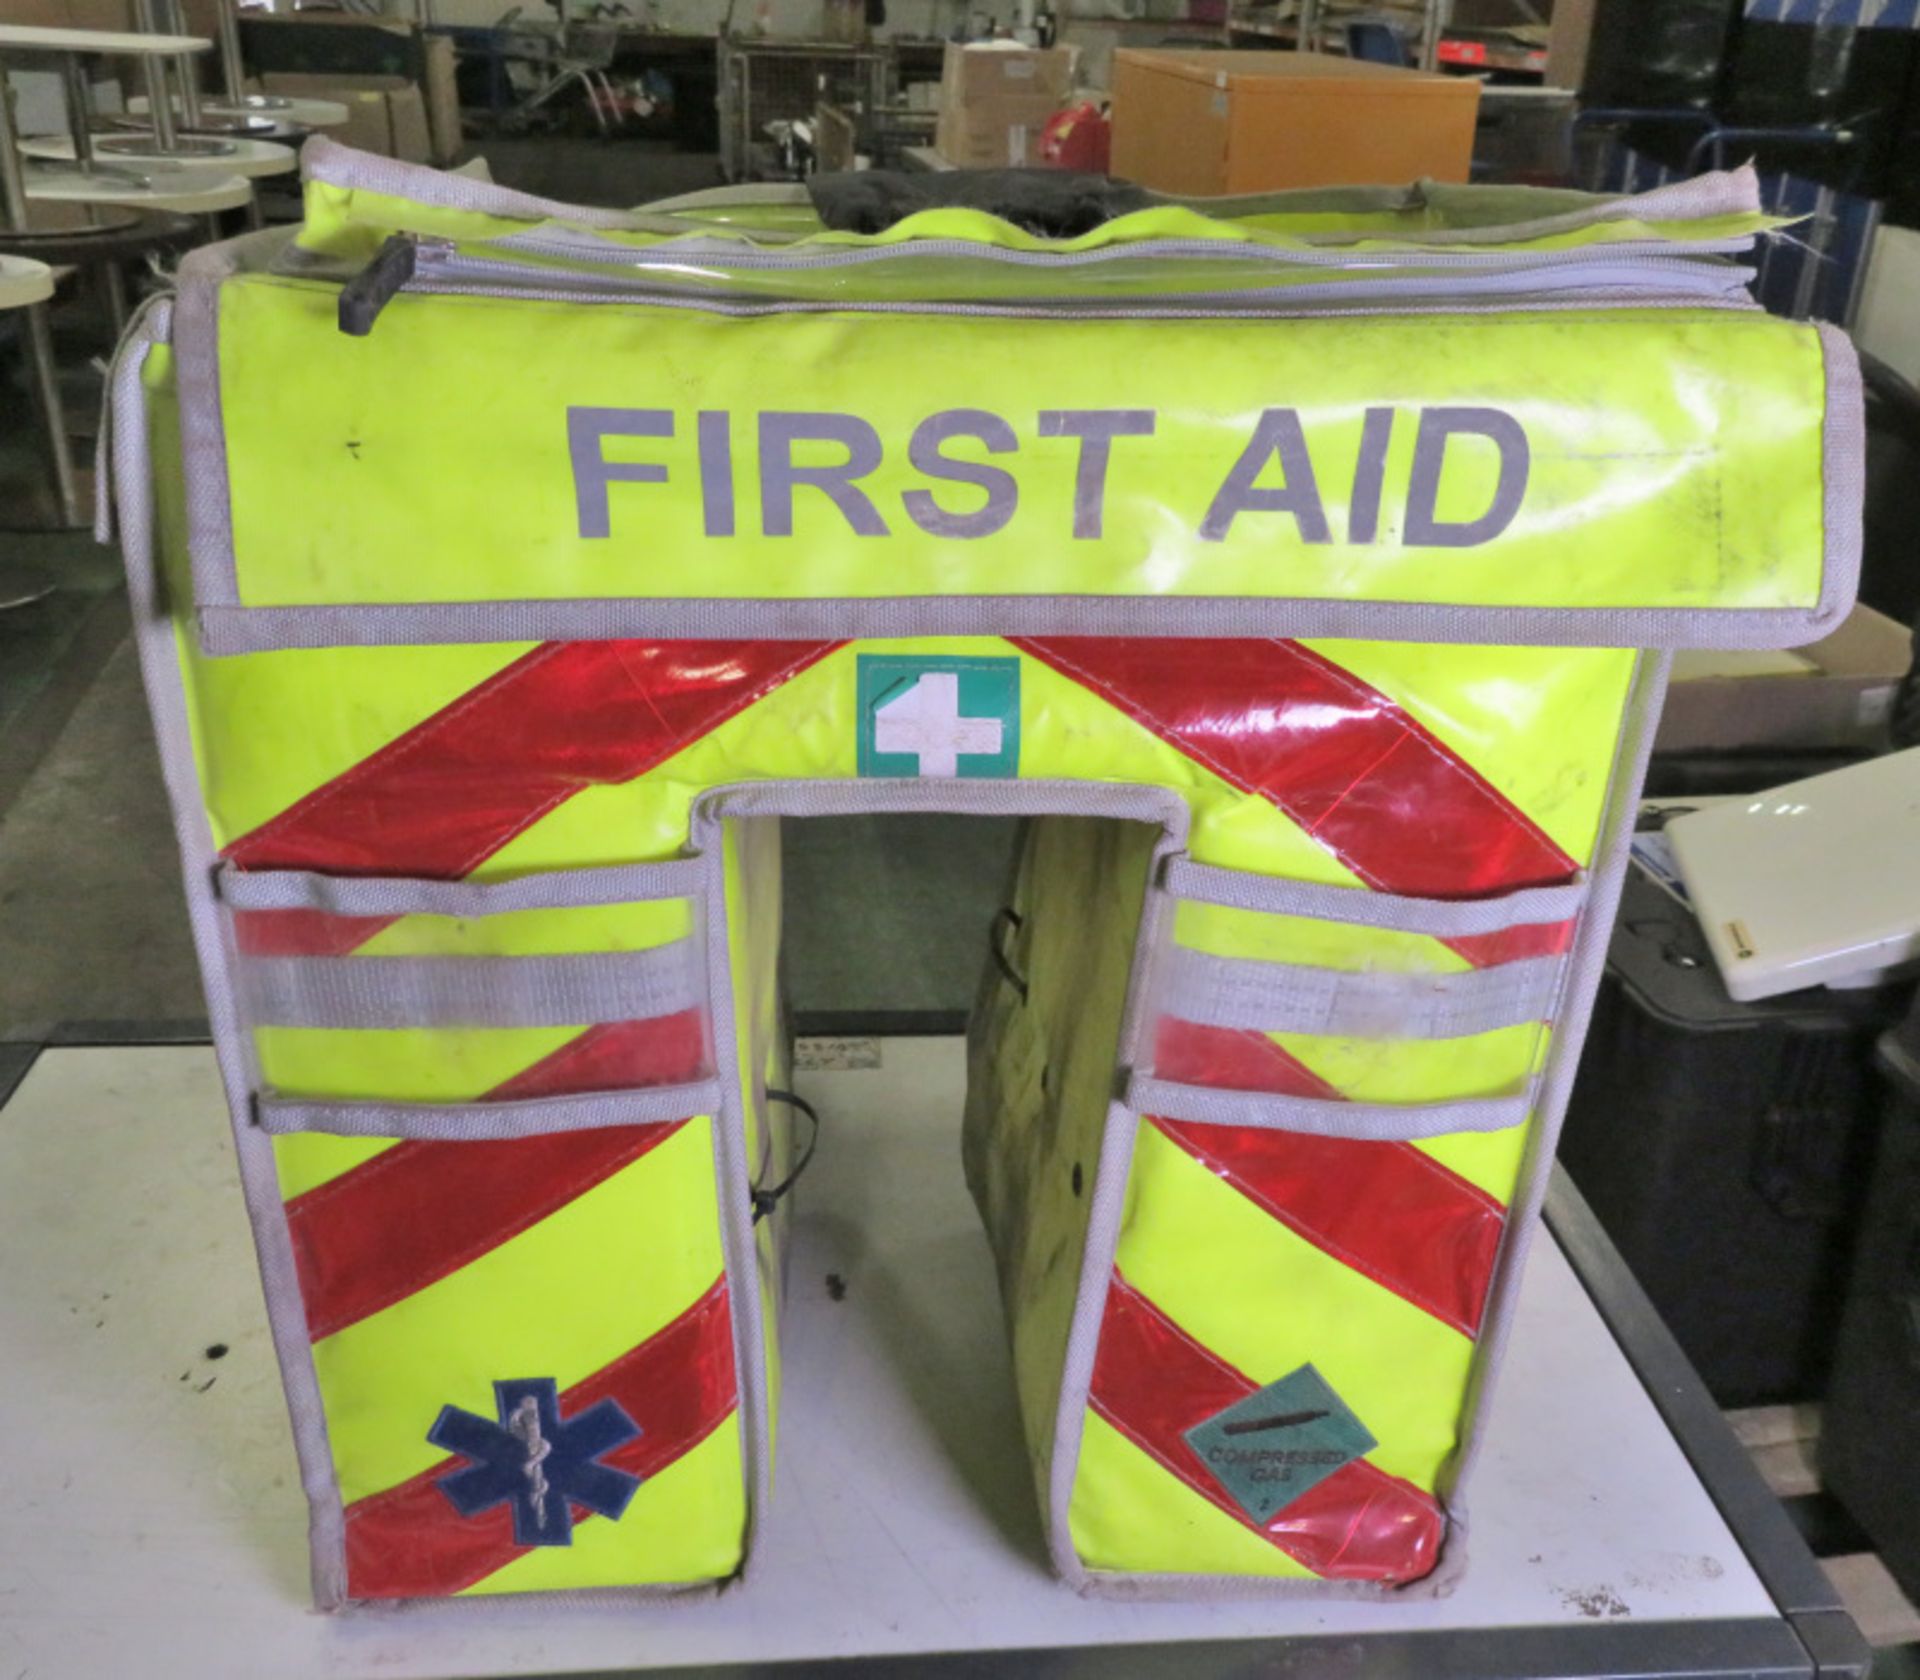 4x Cycle Response Unit First Aid Bags - Image 2 of 5